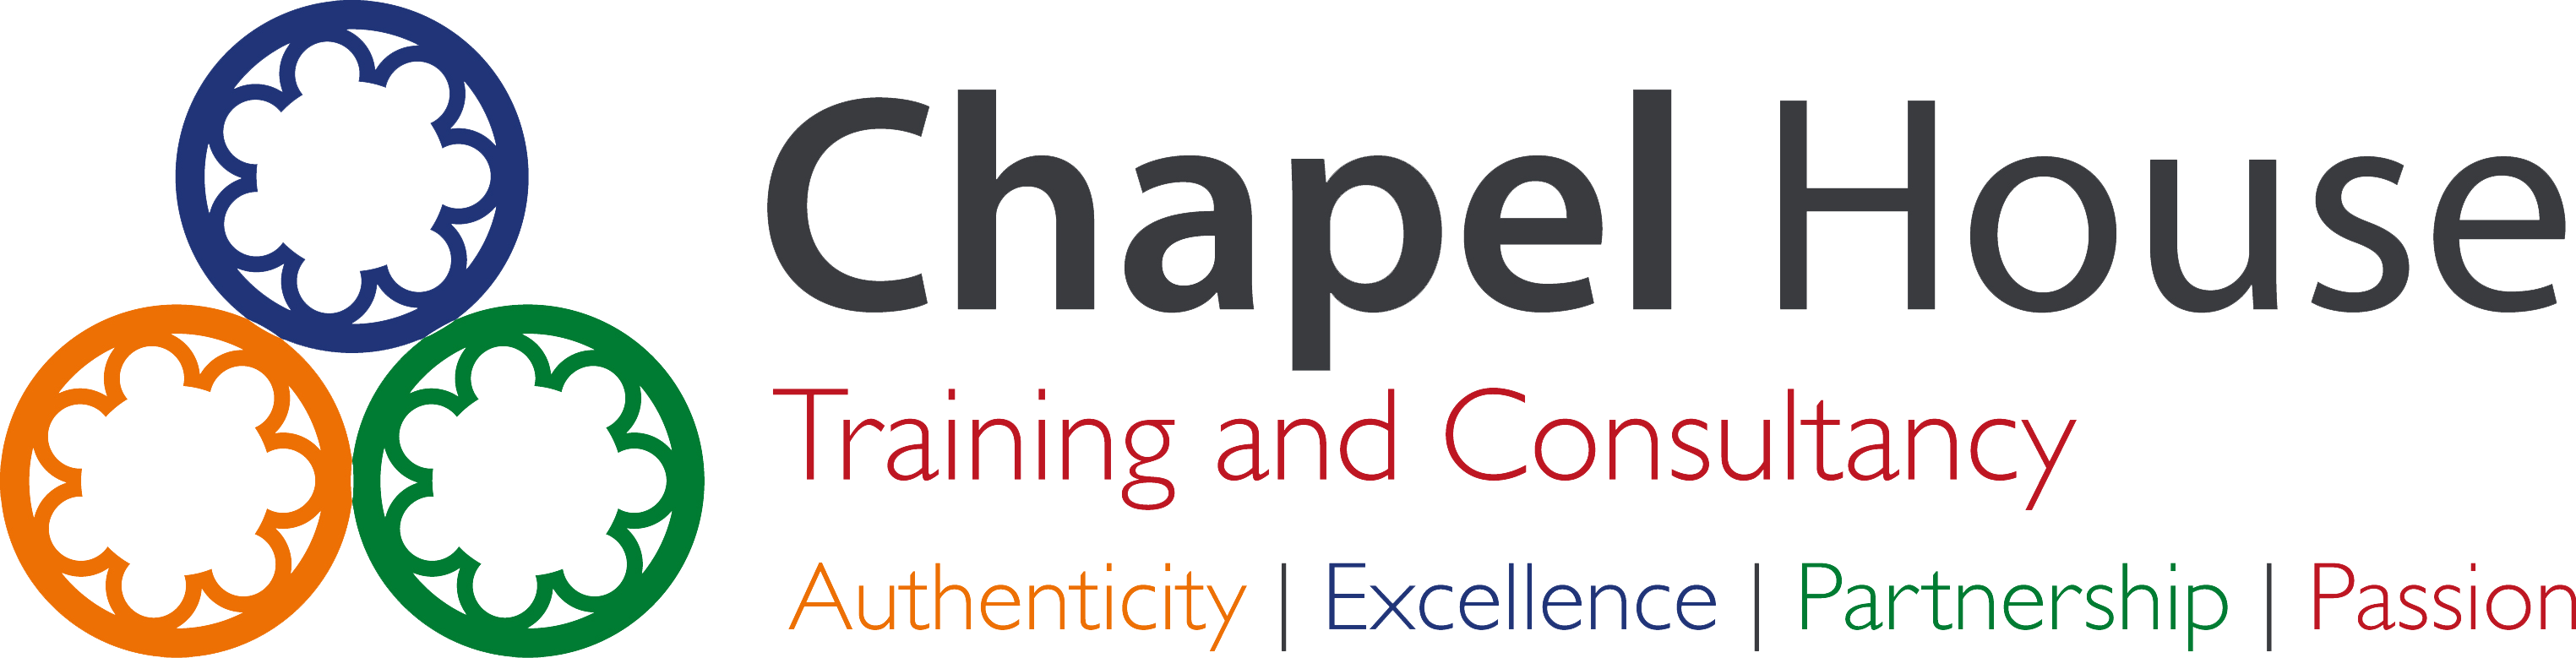 Chapel House Training and Consultancy Ltd